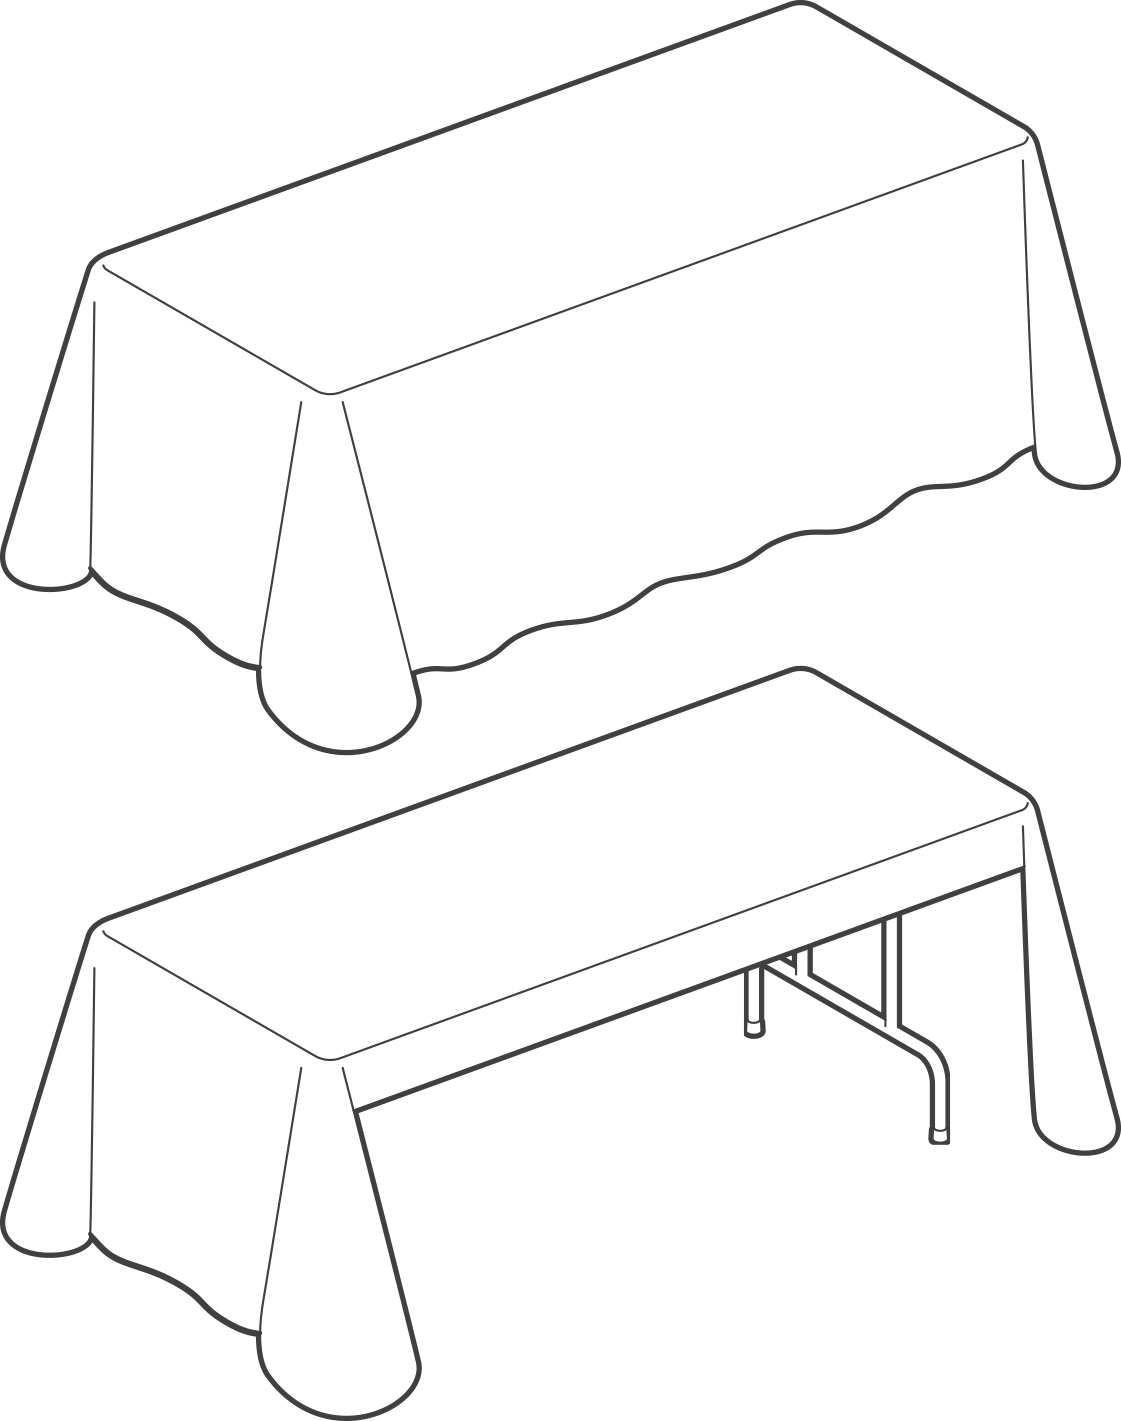 A drawing of this type of tablecloth